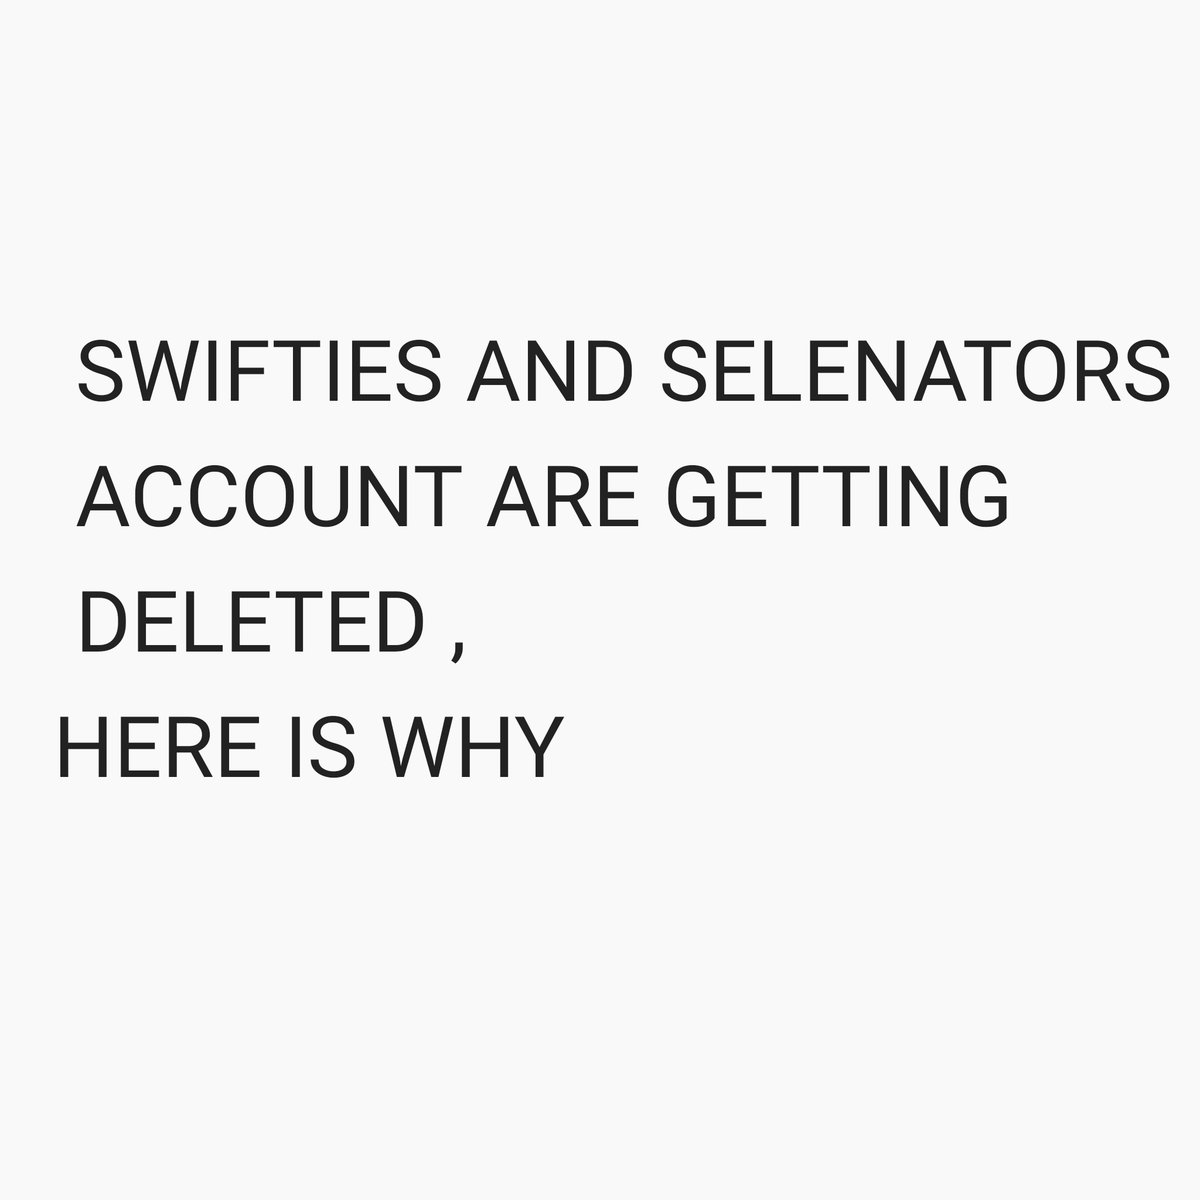 SWIFTIEs and SELENATORS go through this And share it much as possible Save your accounts people and most importantly keep voting and promoting Taylor's coming albums